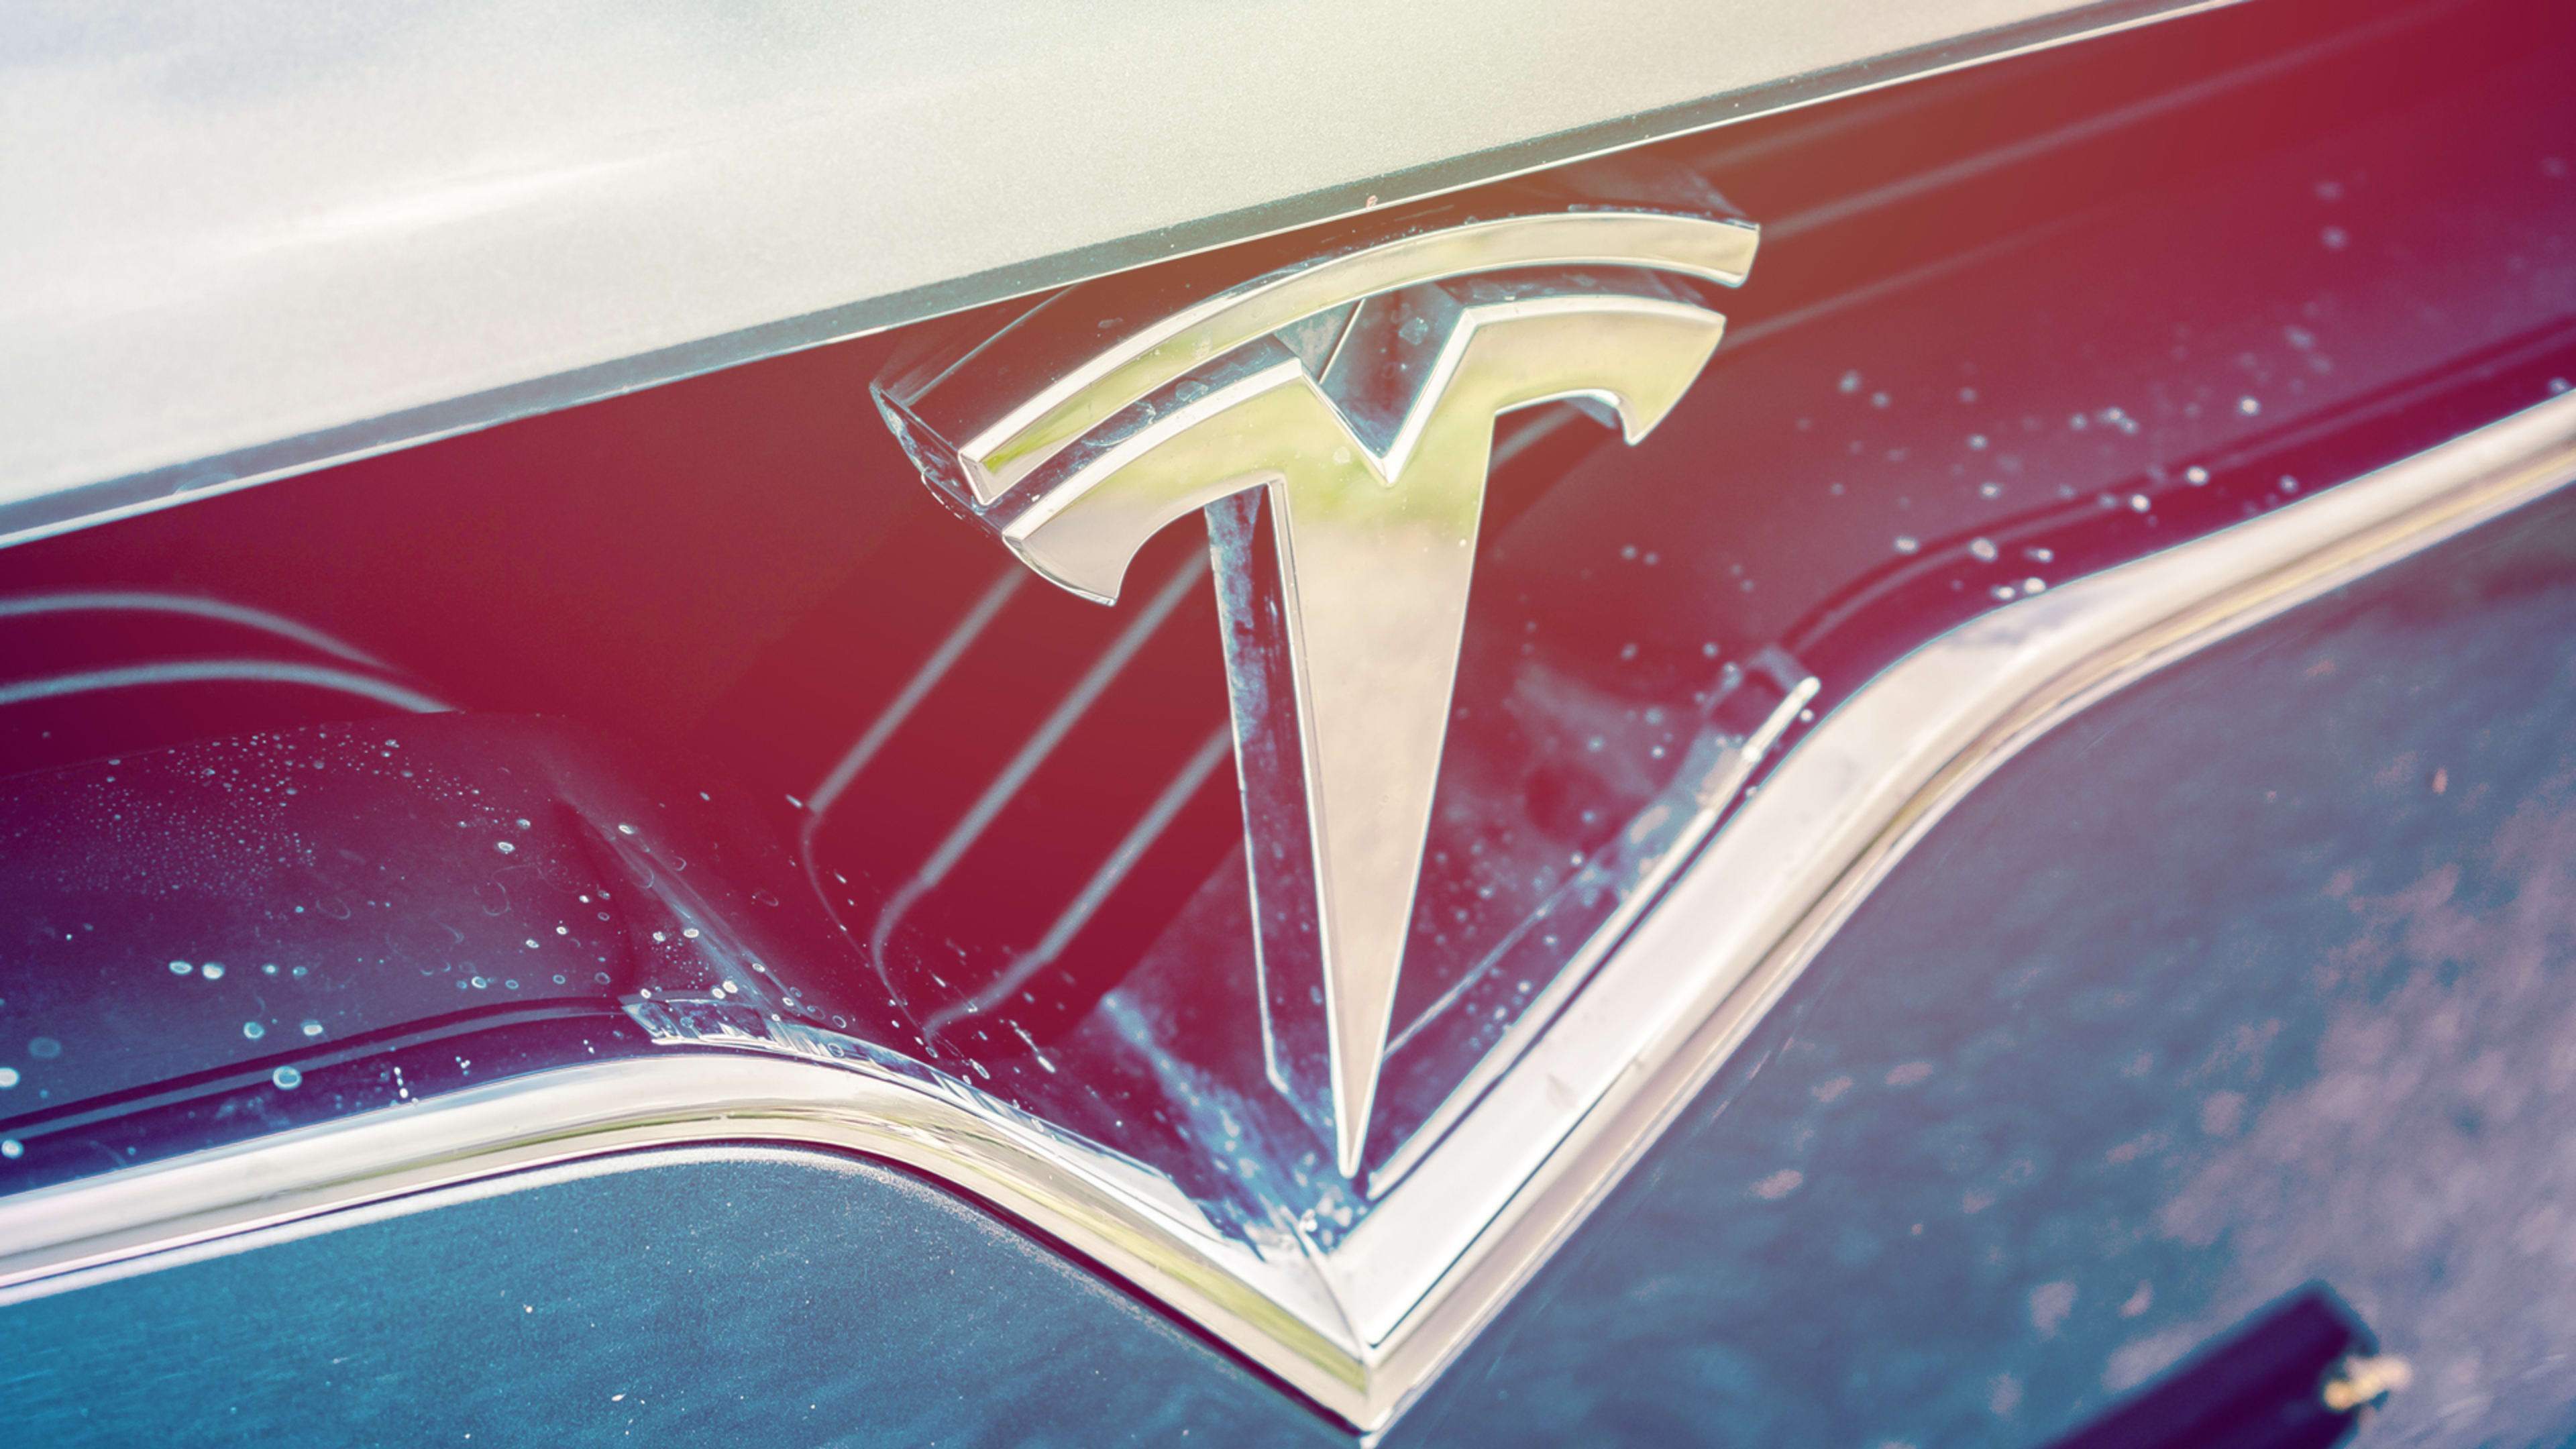 Tesla is putting together a special team to discuss Elon Musk’s proposal to go private